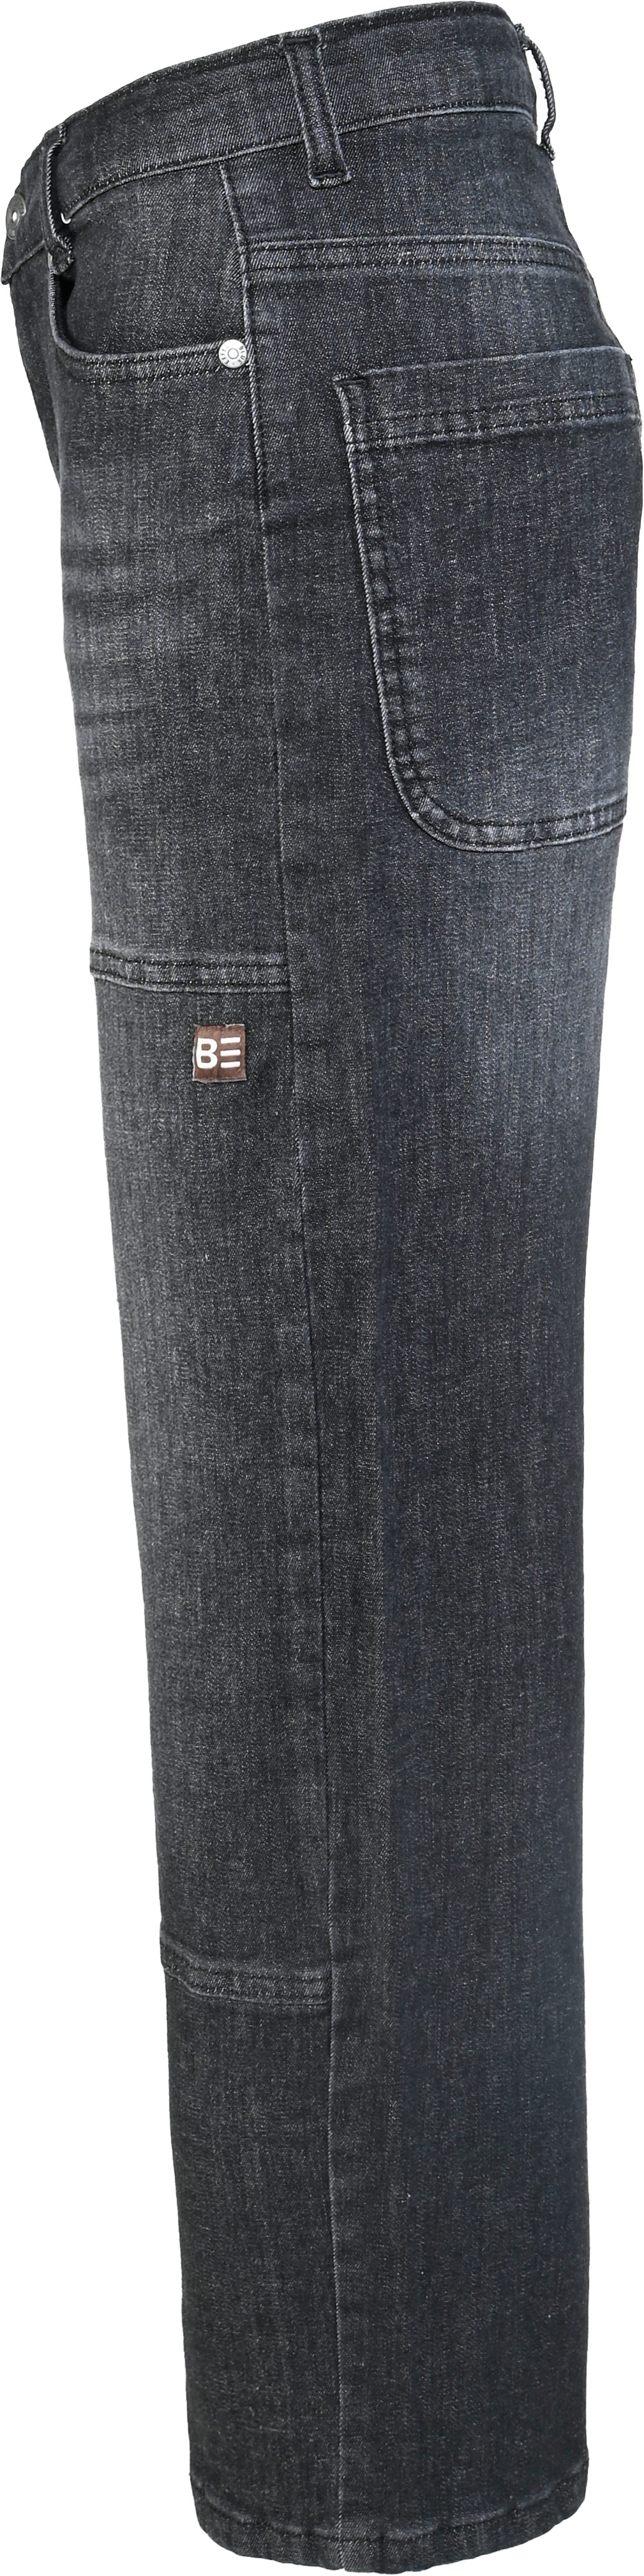 2858-Boys Super Baggy Jeans available in Normal